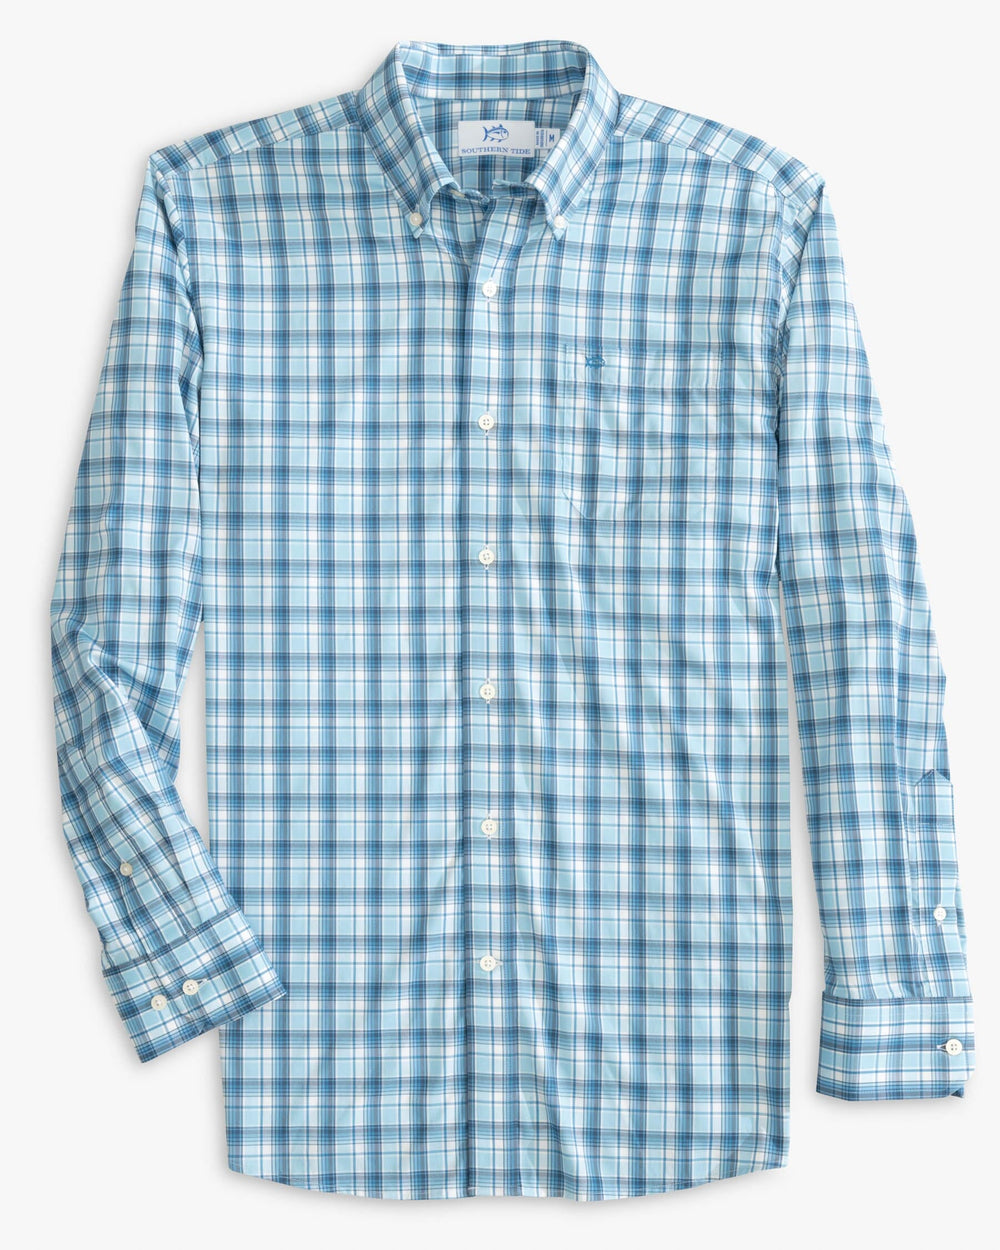 The front view of the Southern Tide brrr Tidepointe Plaid Intercoastal Sport Shirt by Southern Tide - Rain Water